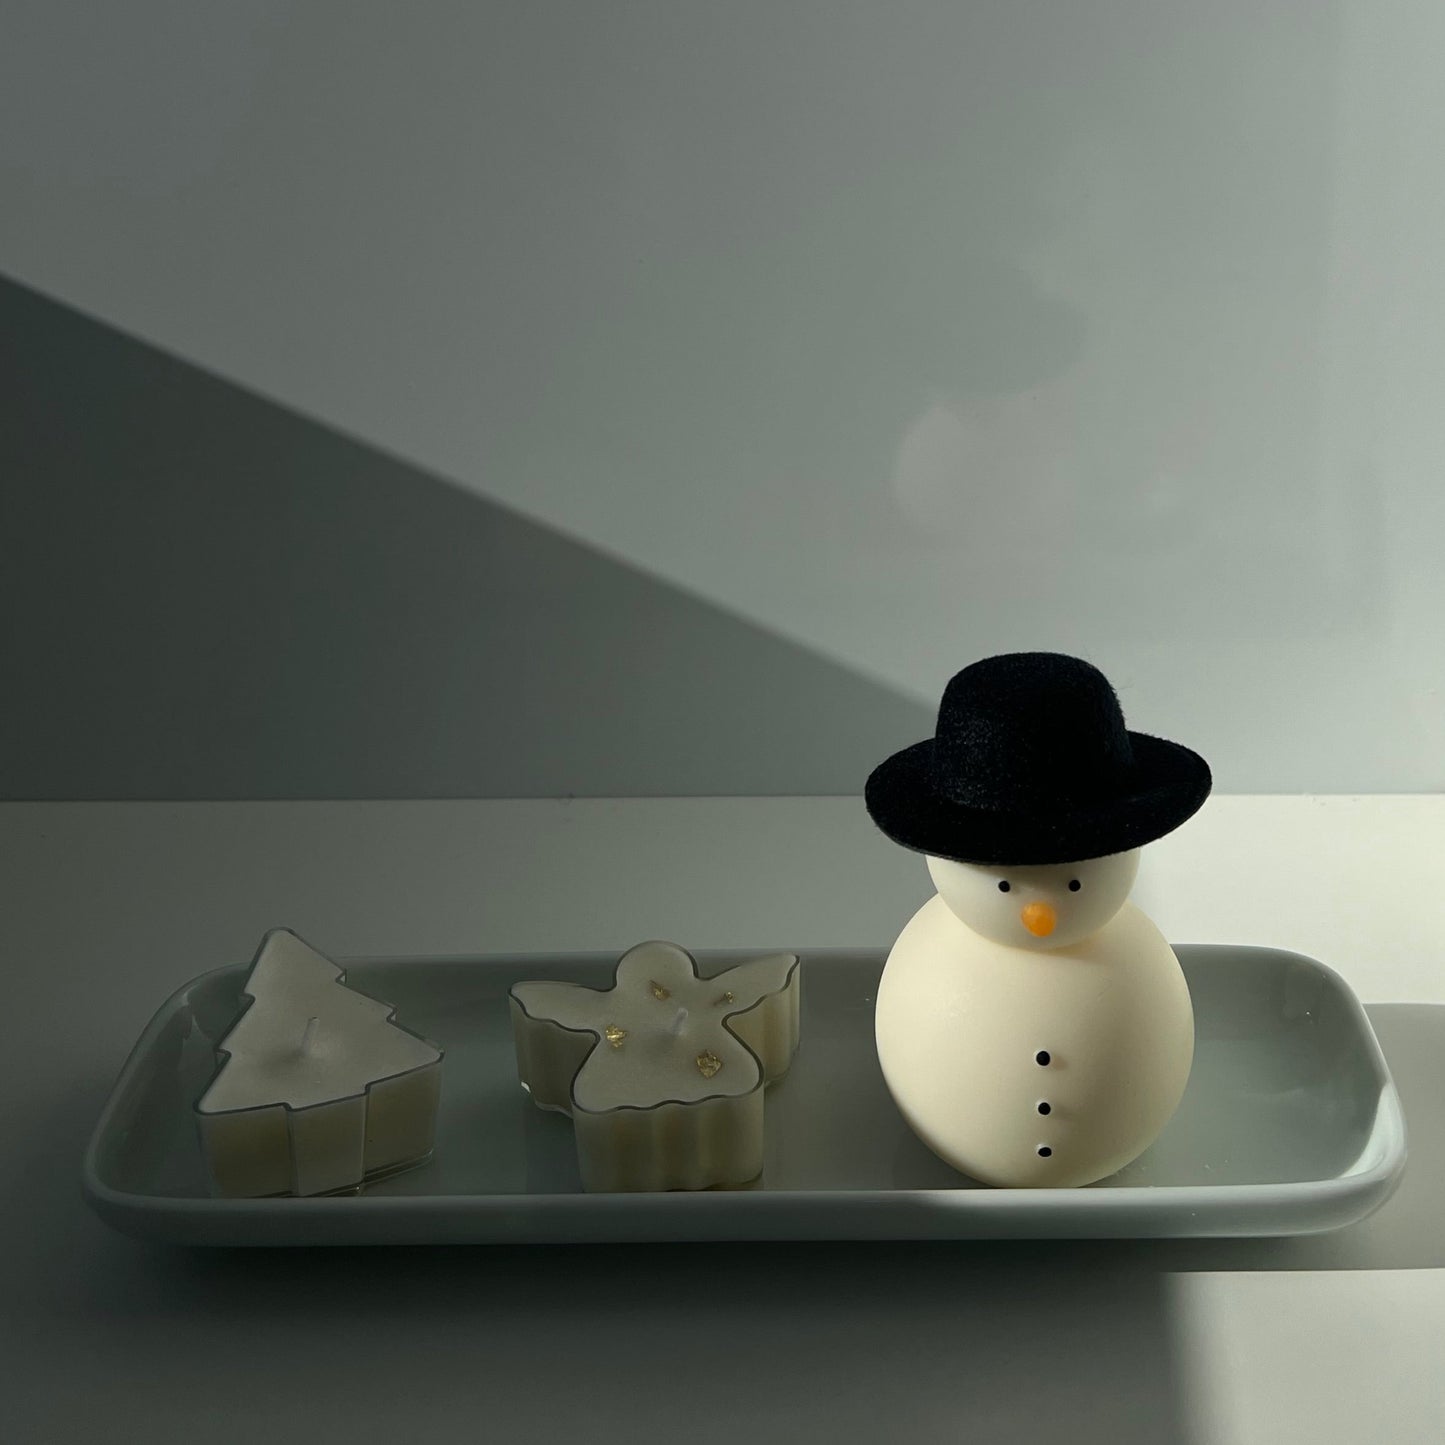 Snowman with a hat